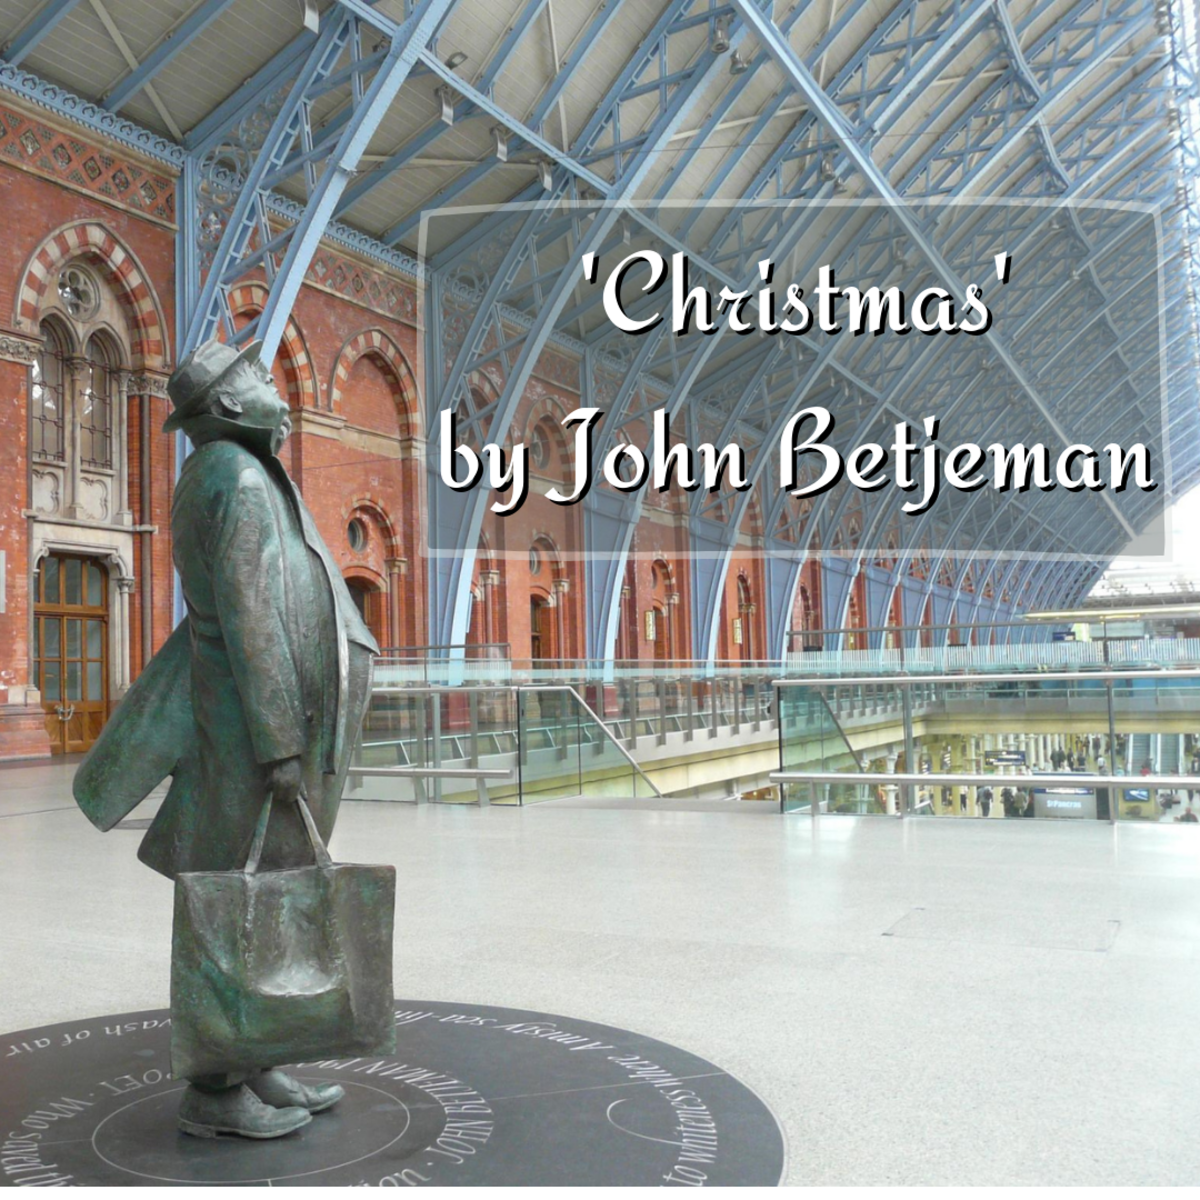 John Betjeman's poem 'Christmas' is a remarkable piece and perhaps one of the greatest Christmas poems. Rediscover the meaning of Christmas with Betjeman's thoughtful and interesting poem.